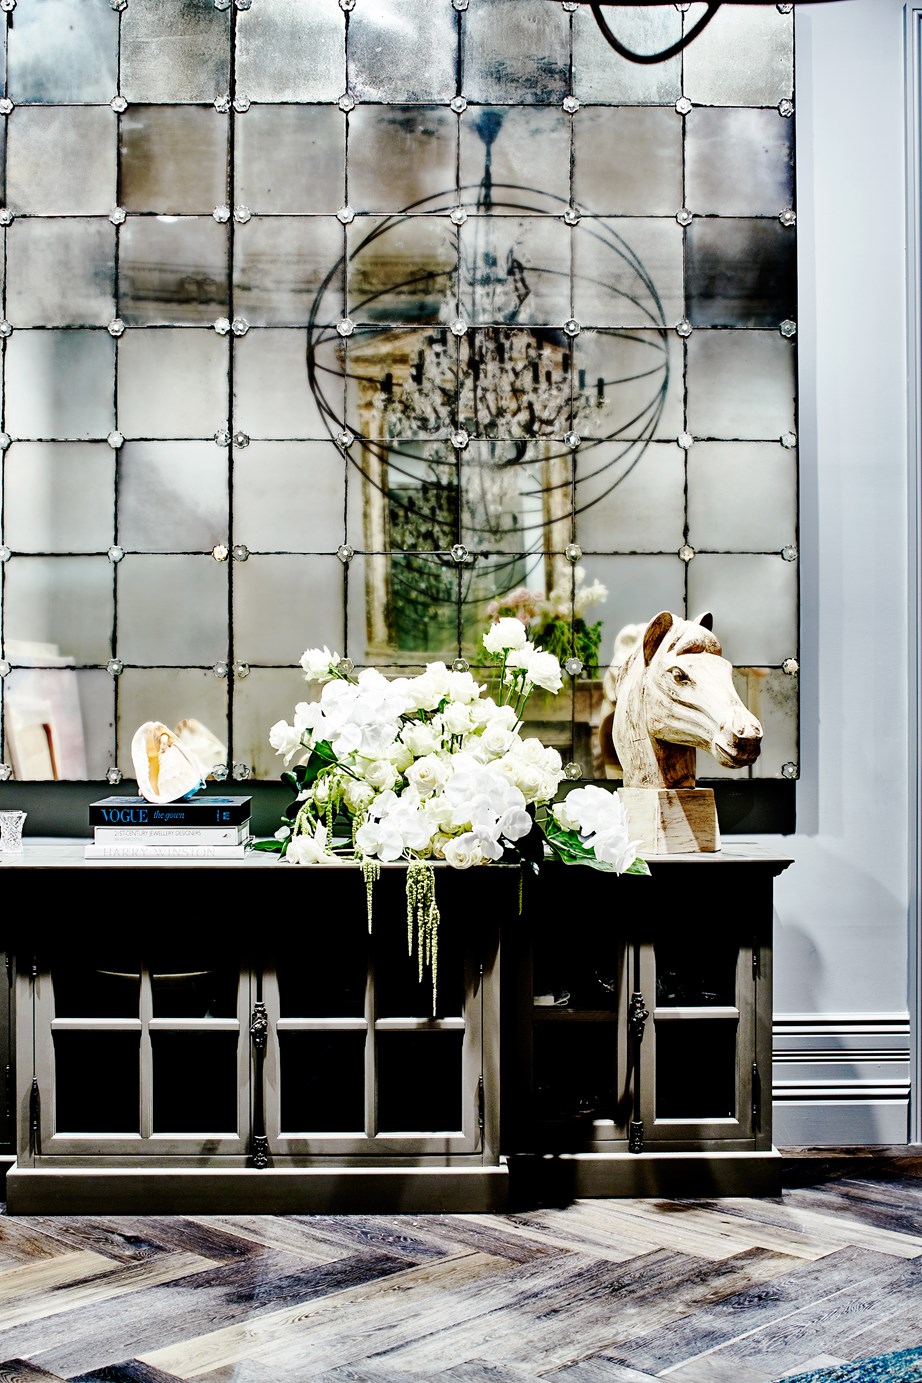 **Supercharge the glamour:** Maximalism is about boosting the drama and glamour - to a point, and with quality furnishings. The entry hall in this [grand Victorian terrace](https://www.homestolove.com.au/saraville-the-grandest-terrace-of-them-all-4215|target="_blank") in Sydney's Potts Point is luxe yet restrained. The [Restoration Hardware](https://rh.com/|target="_blank"|rel="nofollow") chandelier, mosaic mirror, horse 'bust' and cascading blooms are straight out of a fairytale.